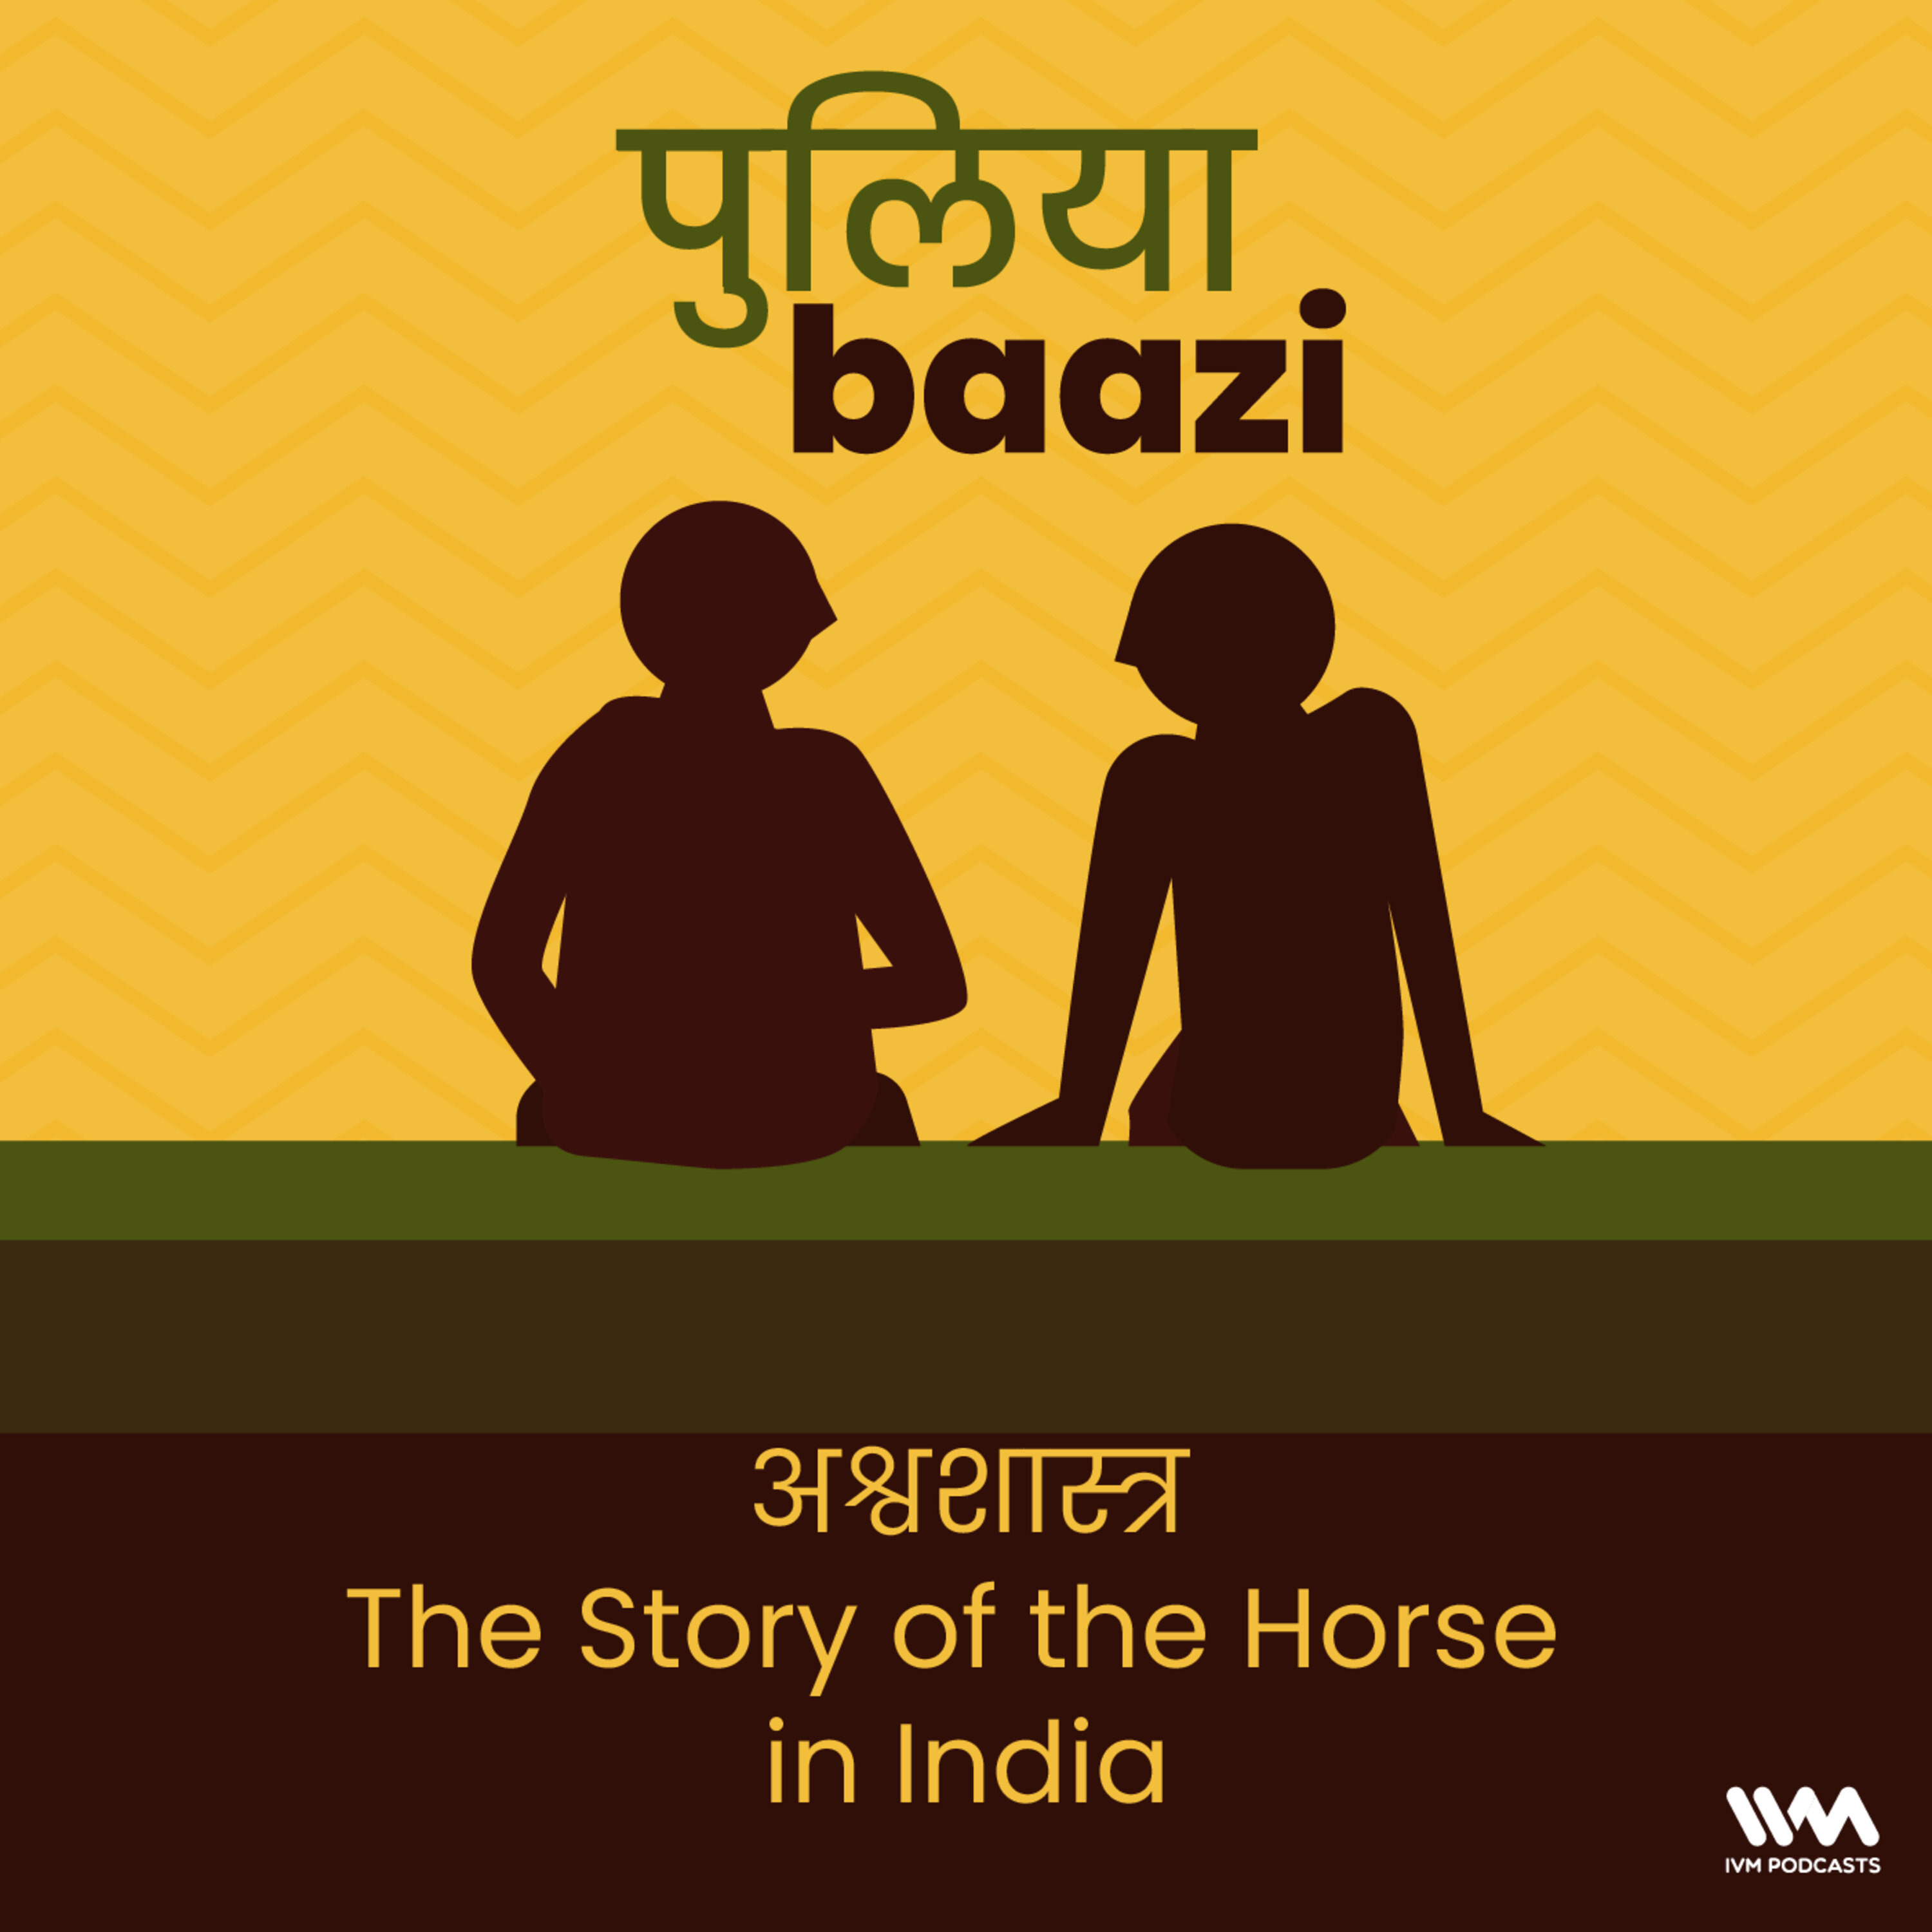 अश्वशास्त्र. The Story of the Horse in India.